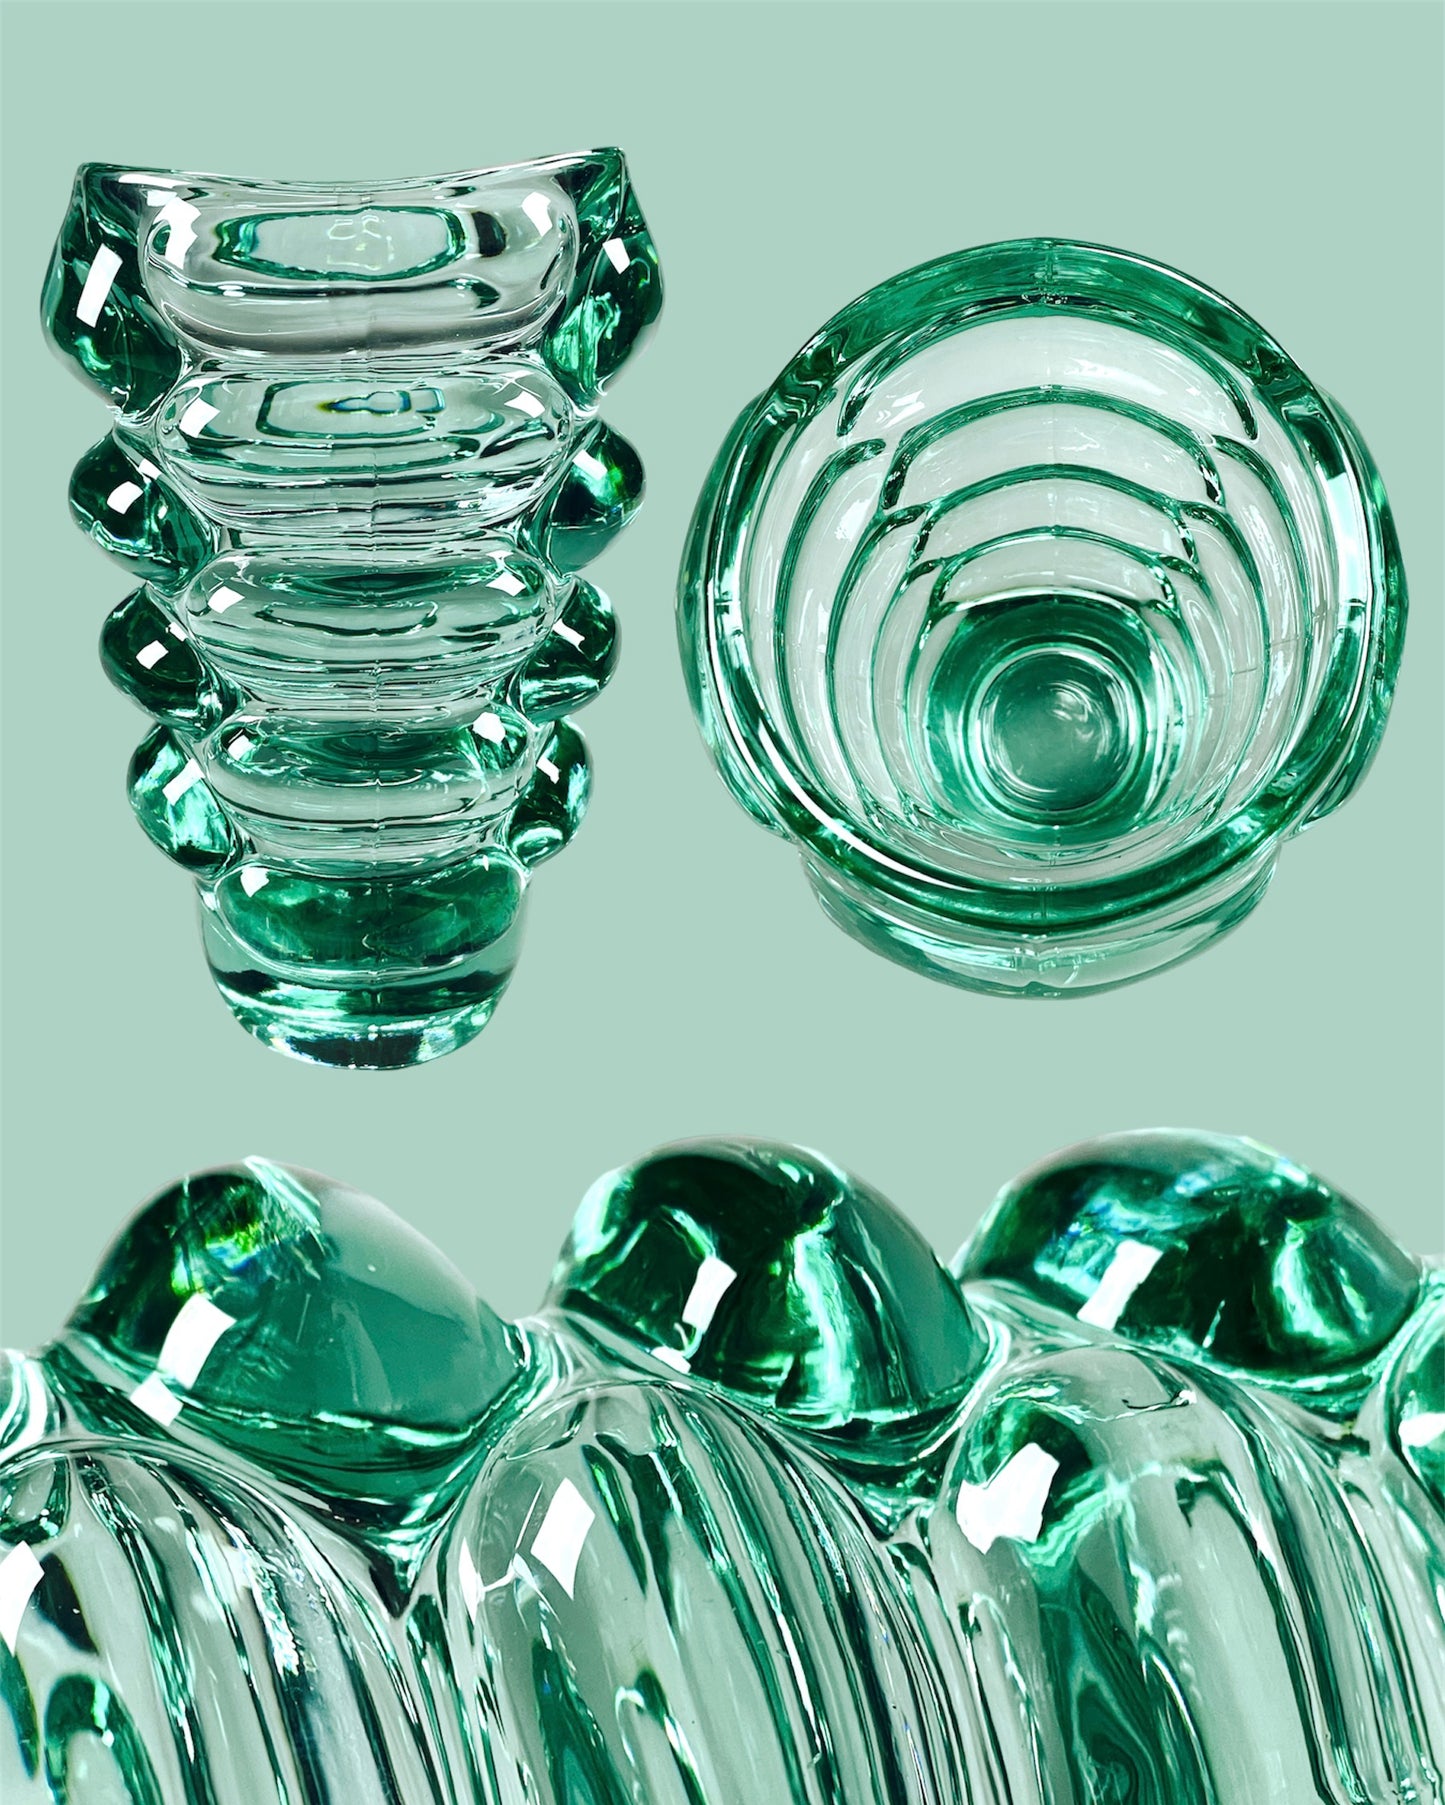 Curvy pressed glass vase in lively turquoise